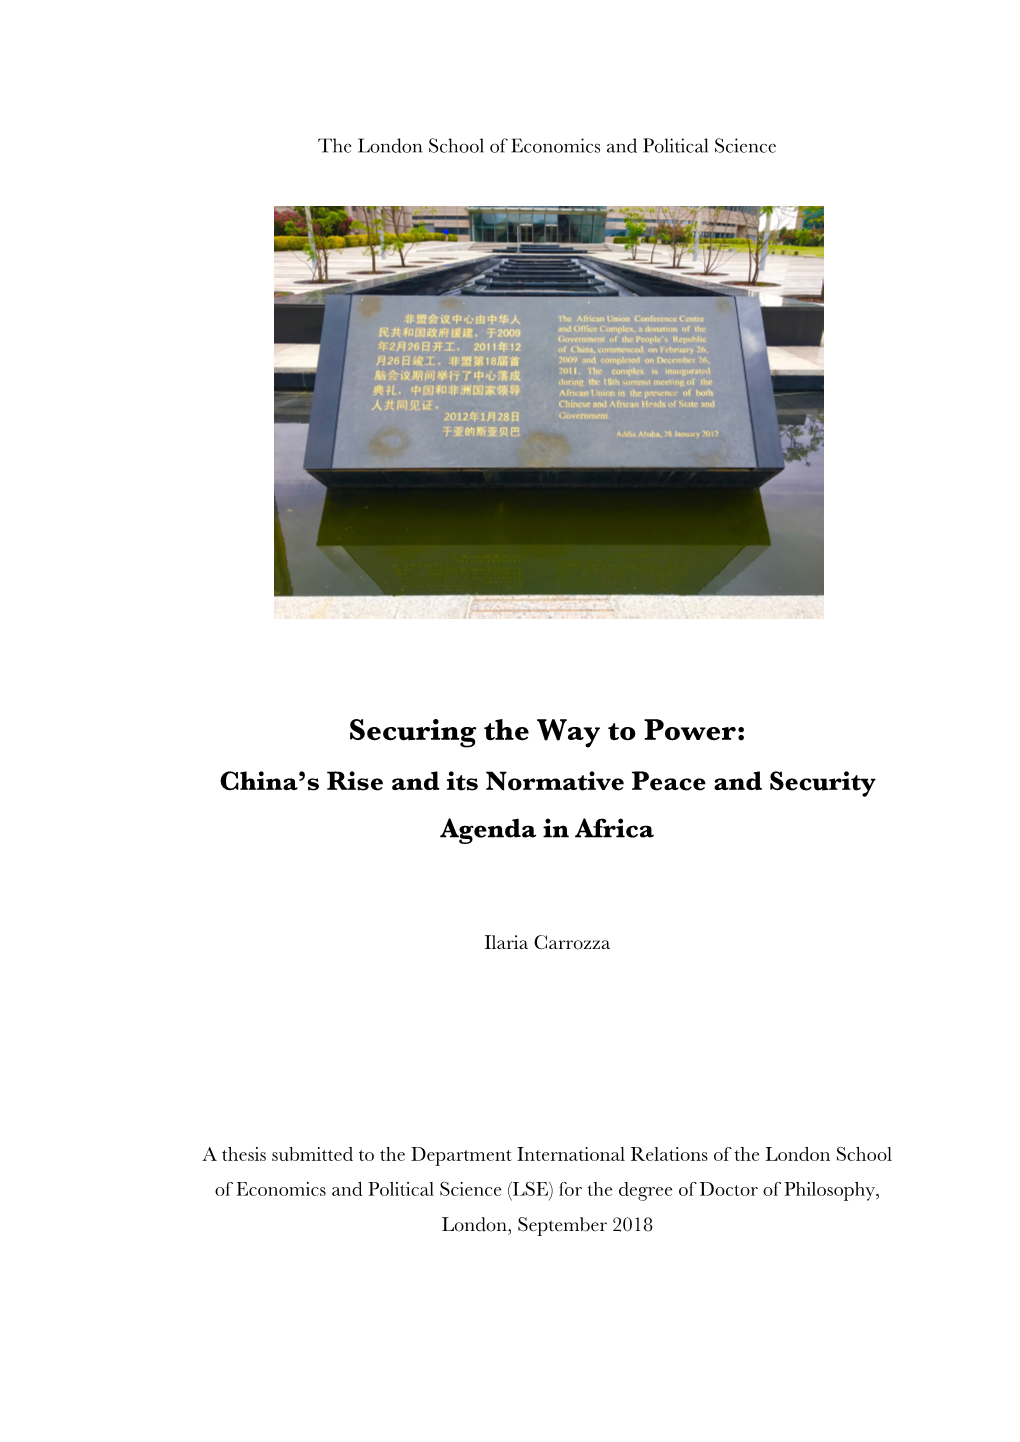 Securing the Way to Power: China’S Rise and Its Normative Peace and Security Agenda in Africa